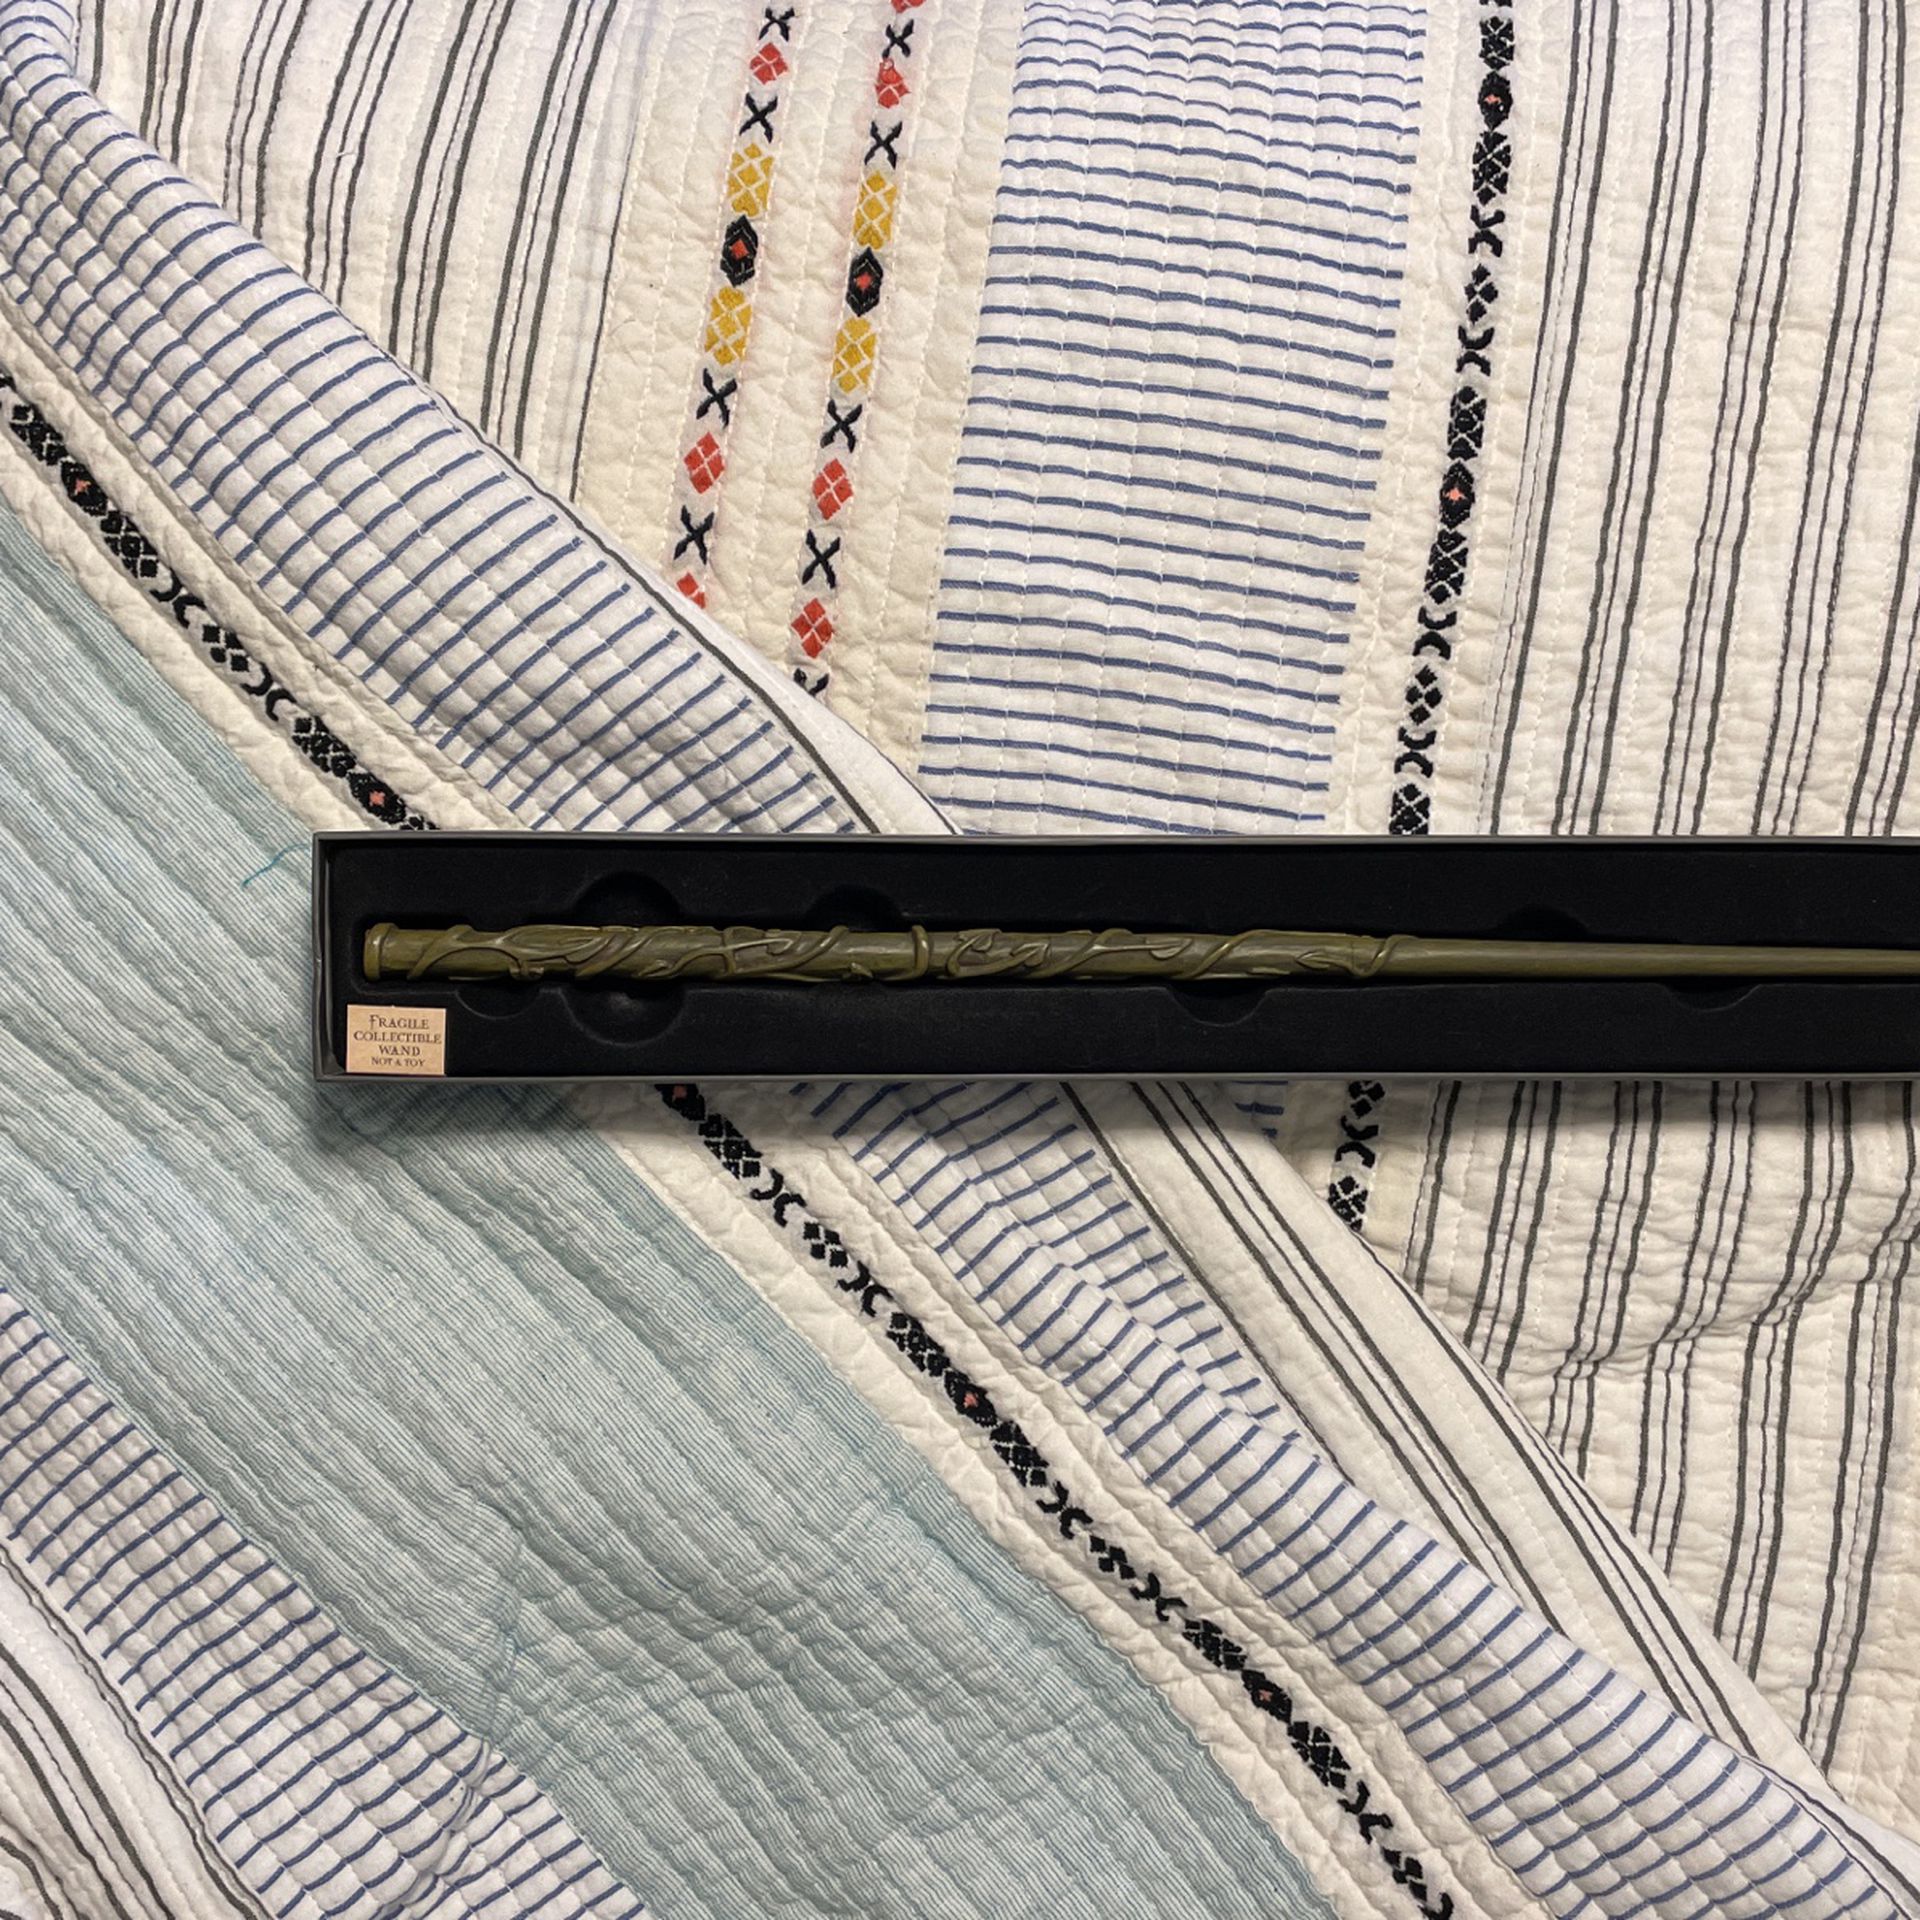 Harry Potter Collectible Wand